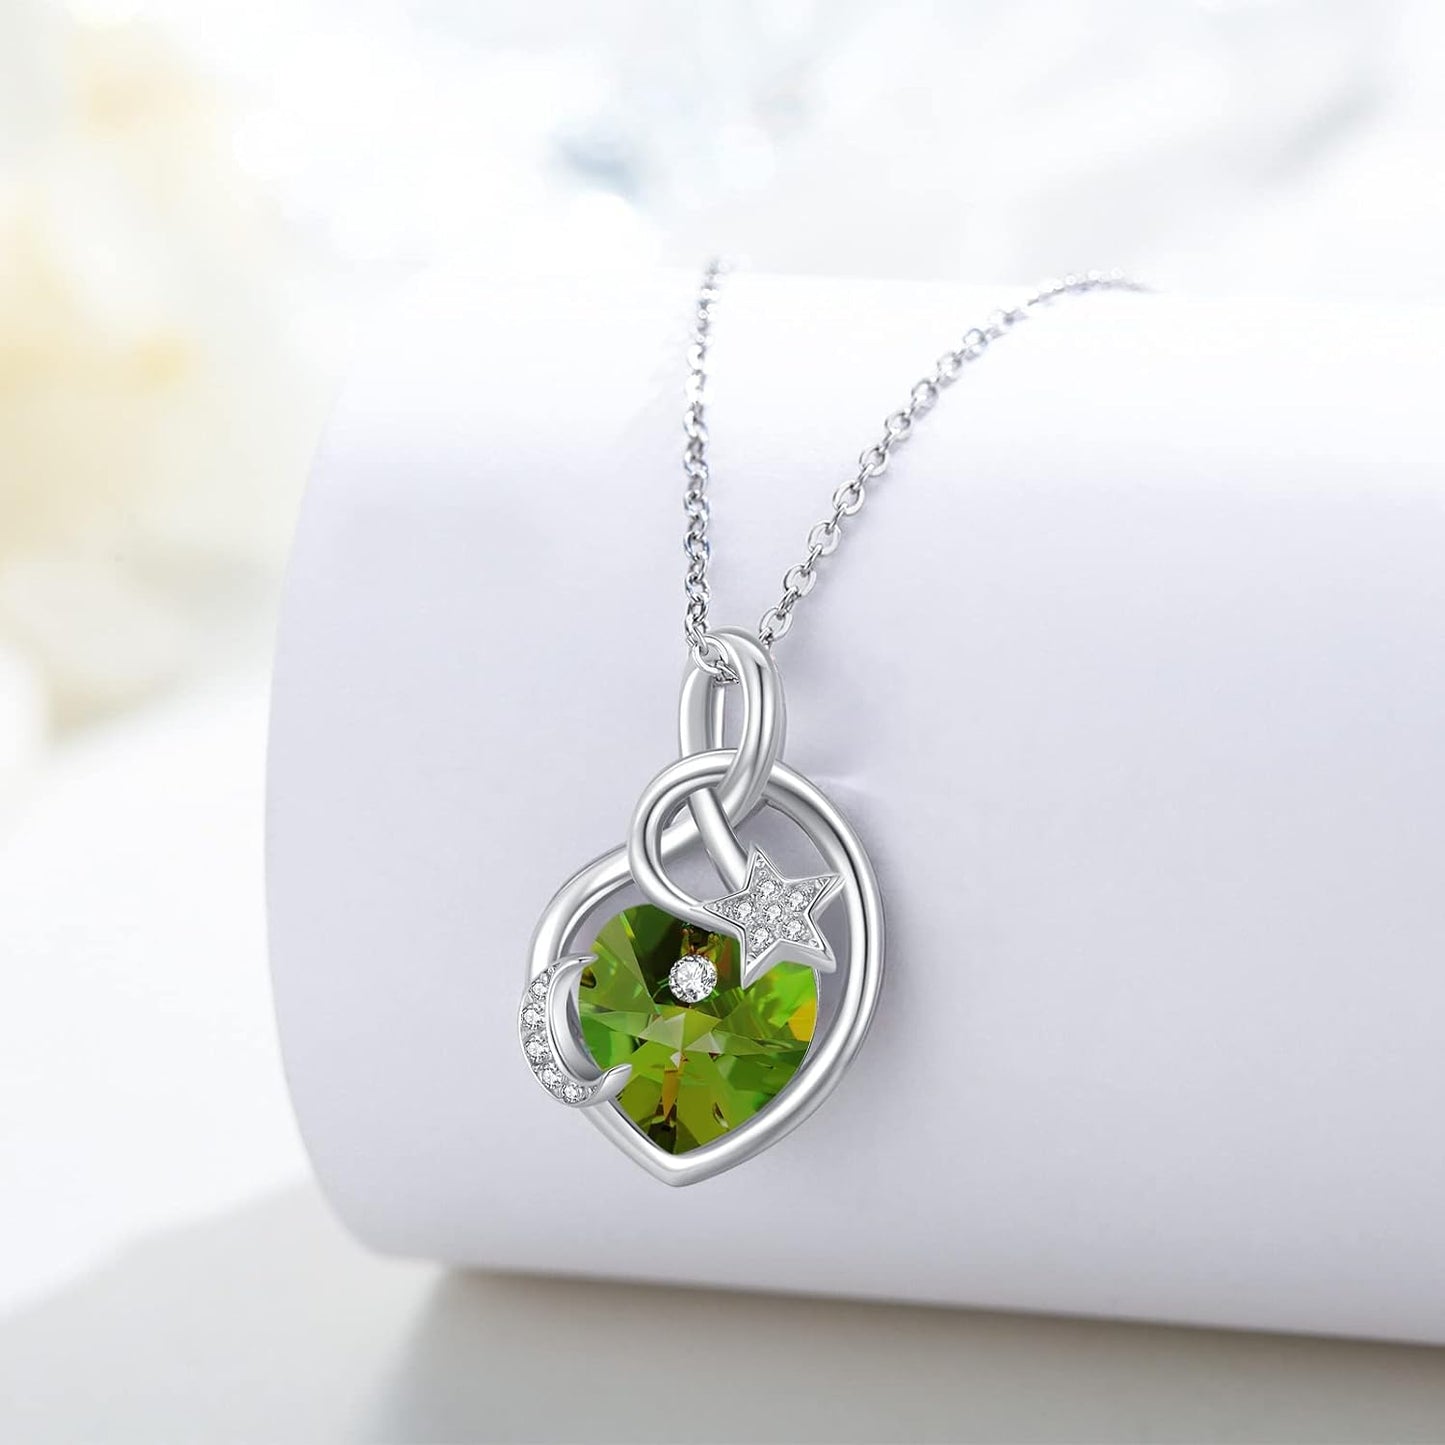 Birthstone Necklace Sterling Silver Birthstone Moon and Star Necklace